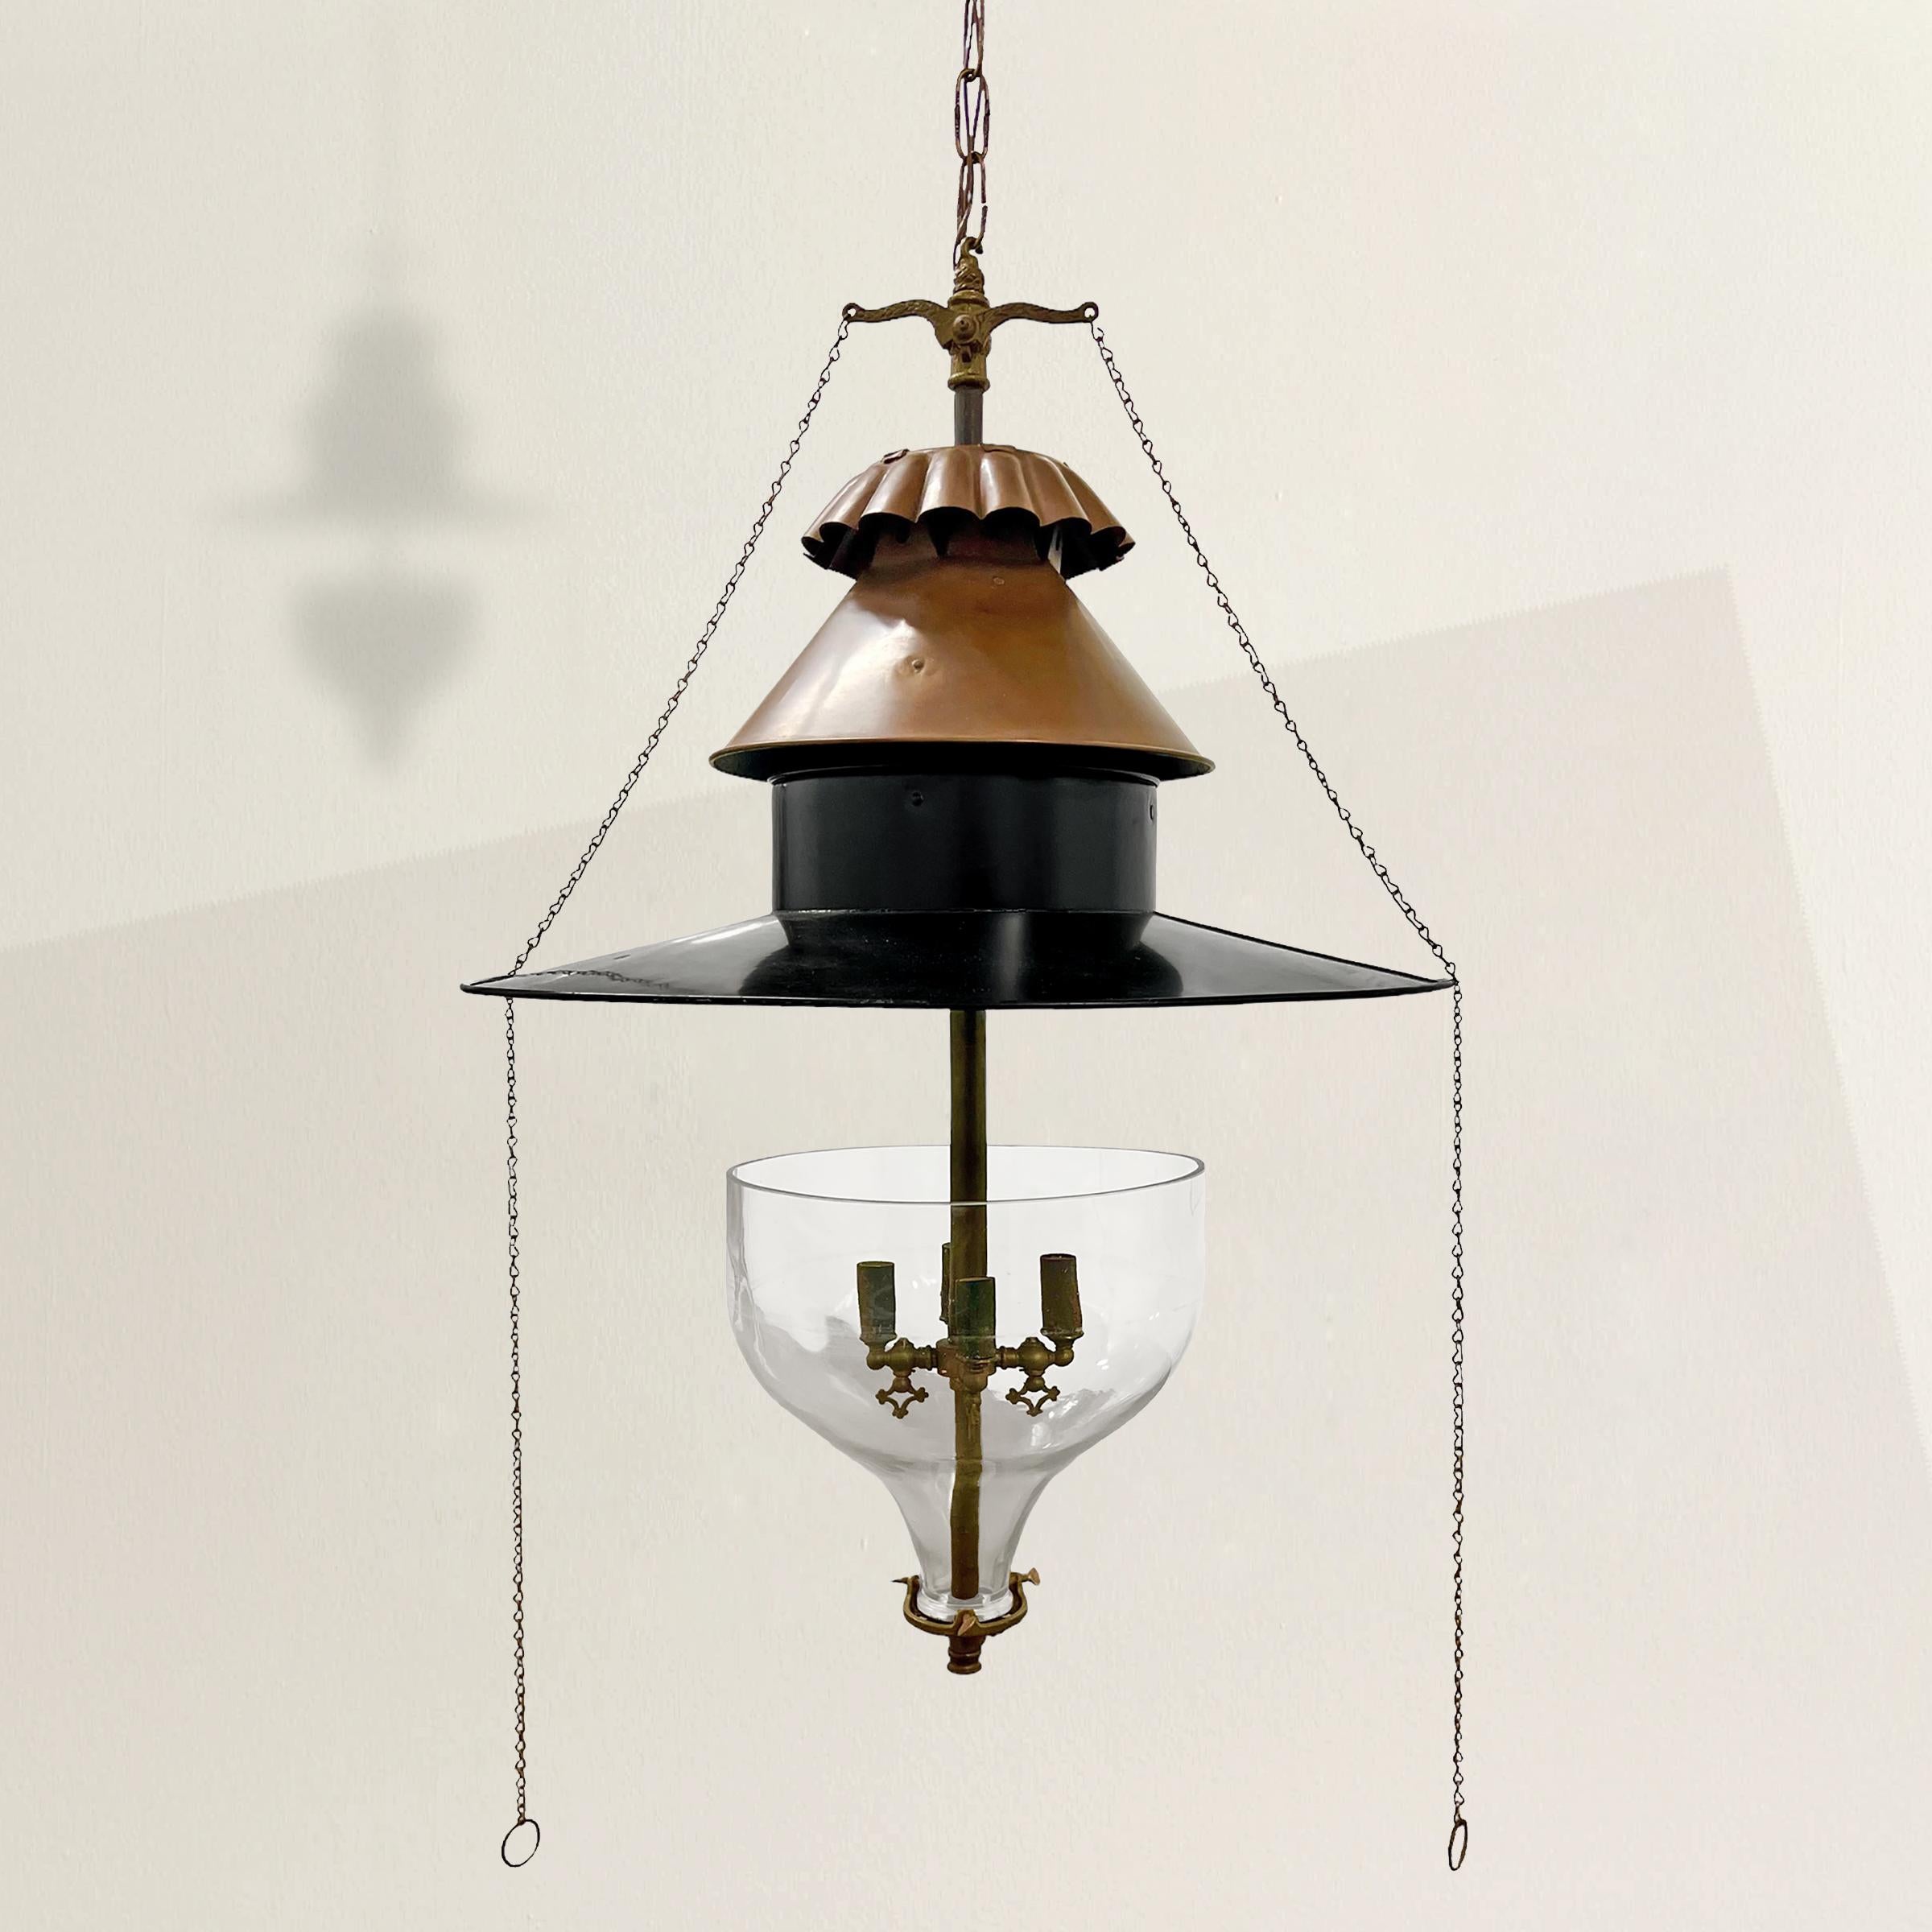 Radiating 19th-century charm, this American oil lamp chandelier, now fully electrified, is a testament to timeless design and innovation. Its large round copper and steel shade exudes historic elegance, while four lights suspended in an inverted